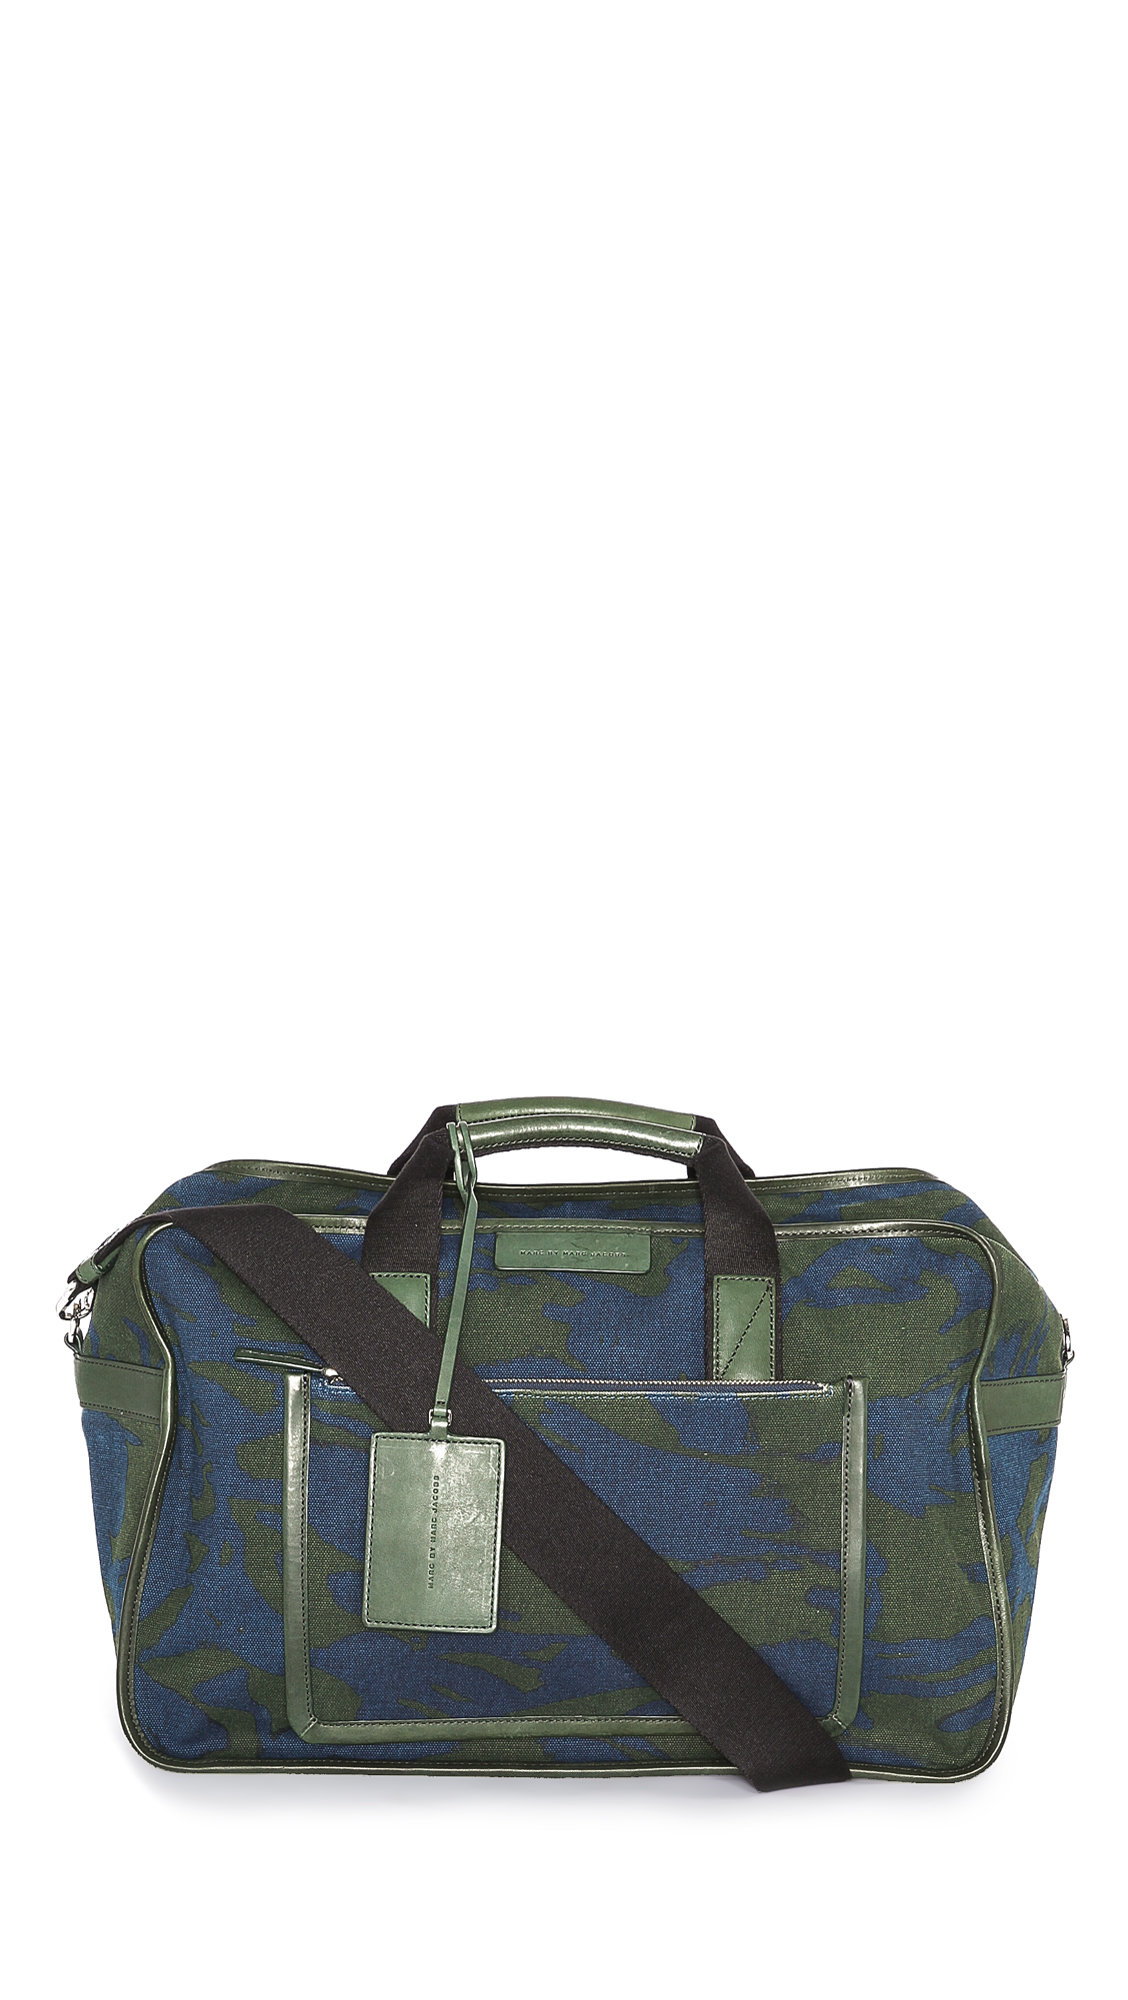 Marc By Marc Jacobs Canvas Duffel Bag with Leather Trim in Green for Men (Icelandic Blue Multi ...